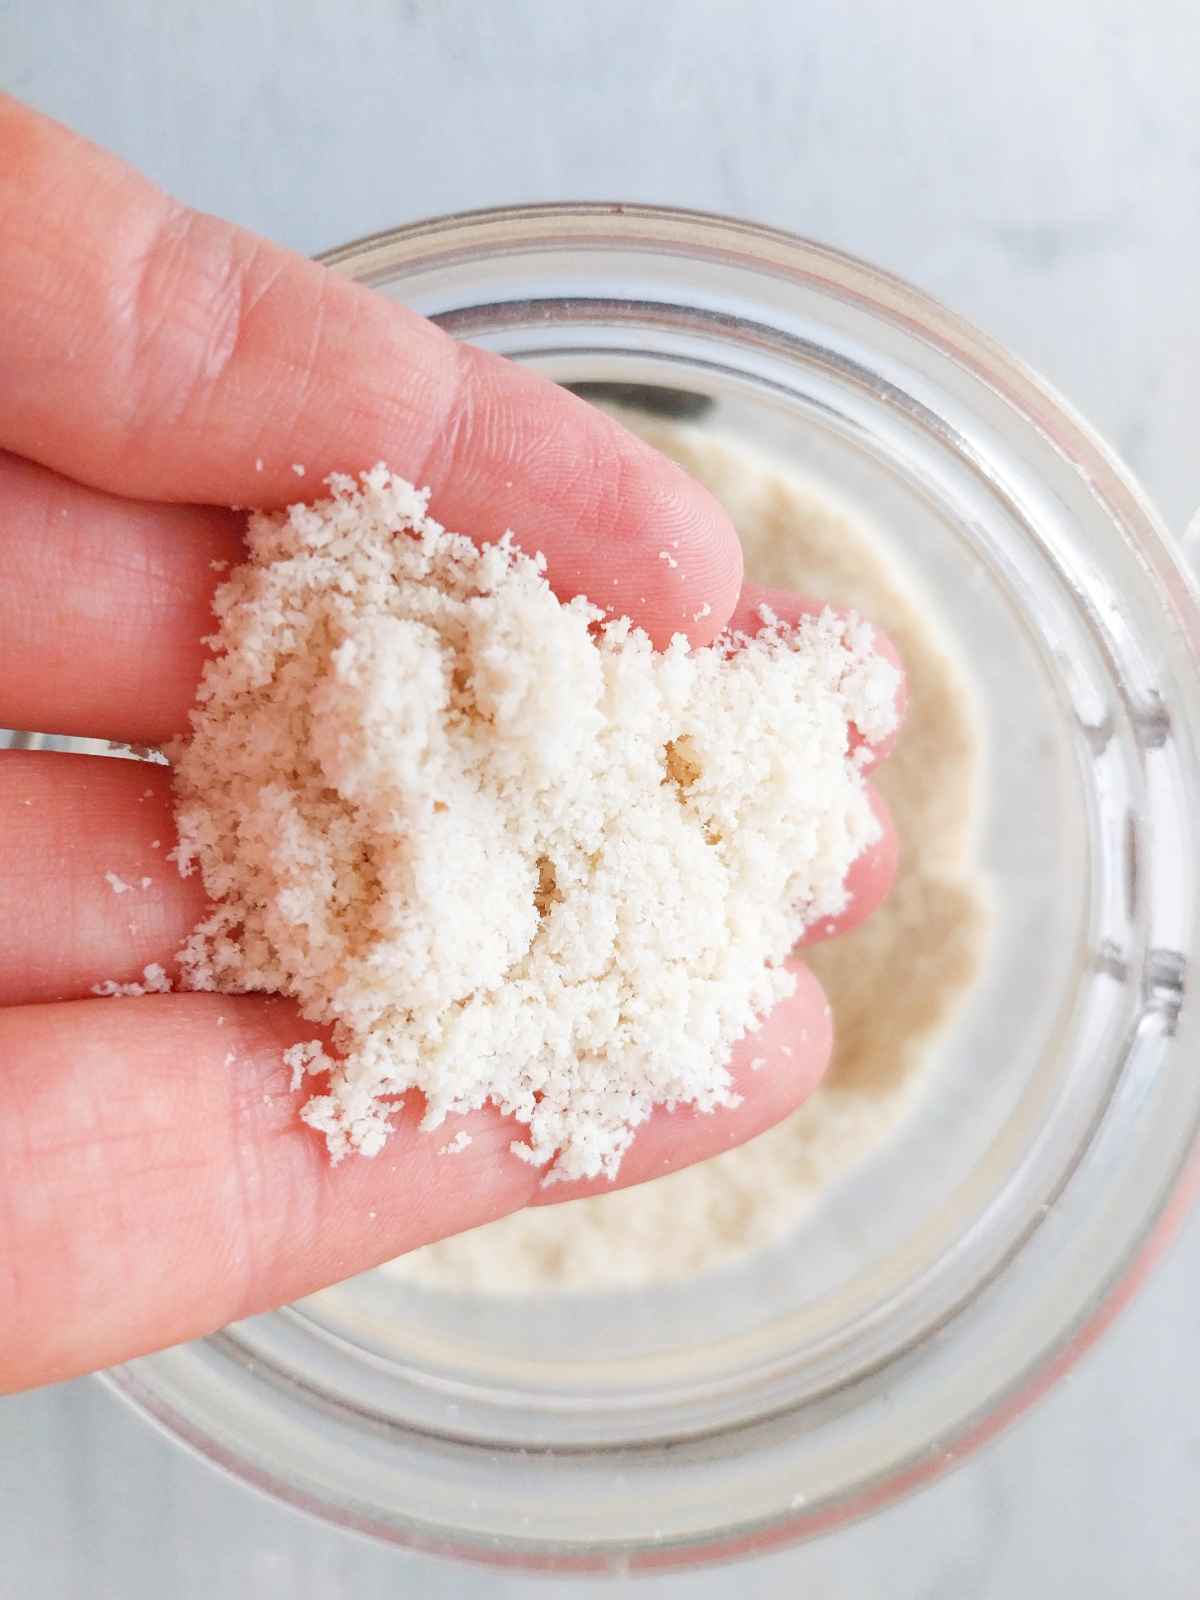 Homemade Almond flour held in a hand over a glass jar.